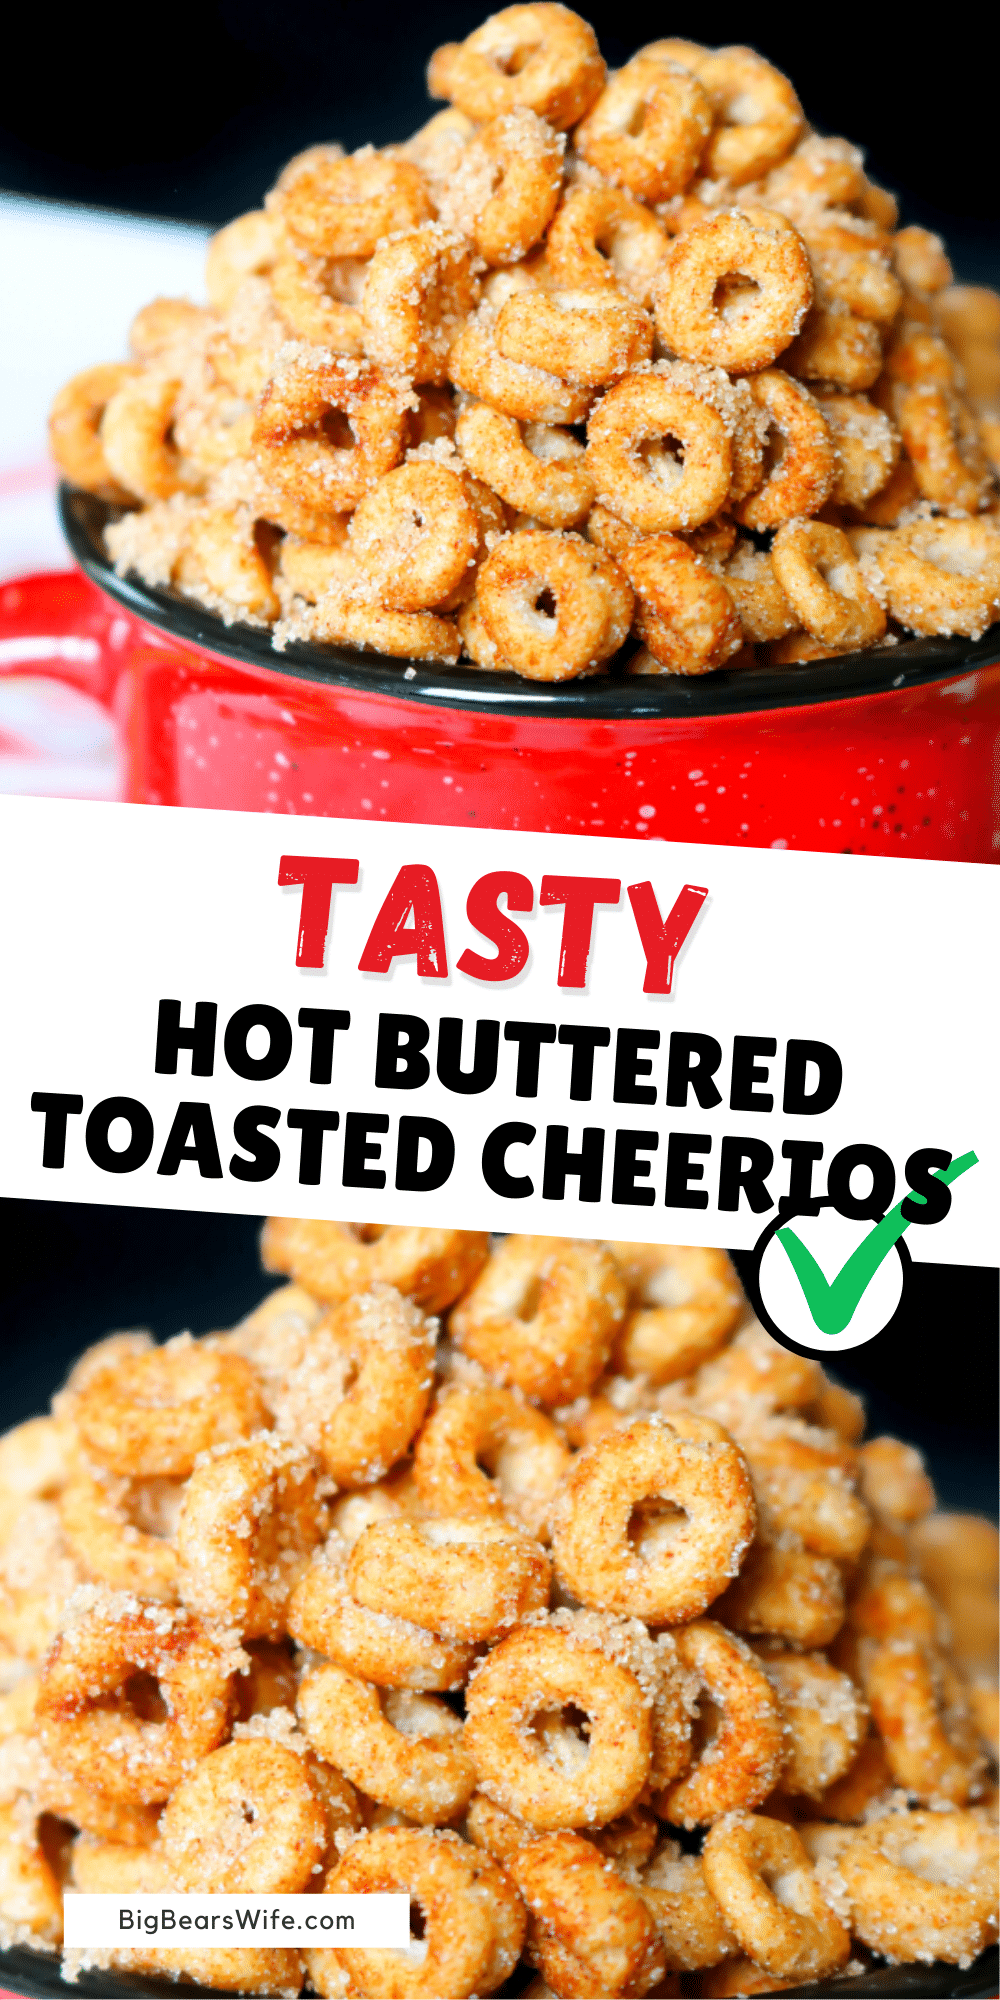 These Mini Doughnut Hot Buttered Toasted Cheerios are a perfect sweet treat and super easy to make! Toasted Cheerios are perfect for snacking! via @bigbearswife